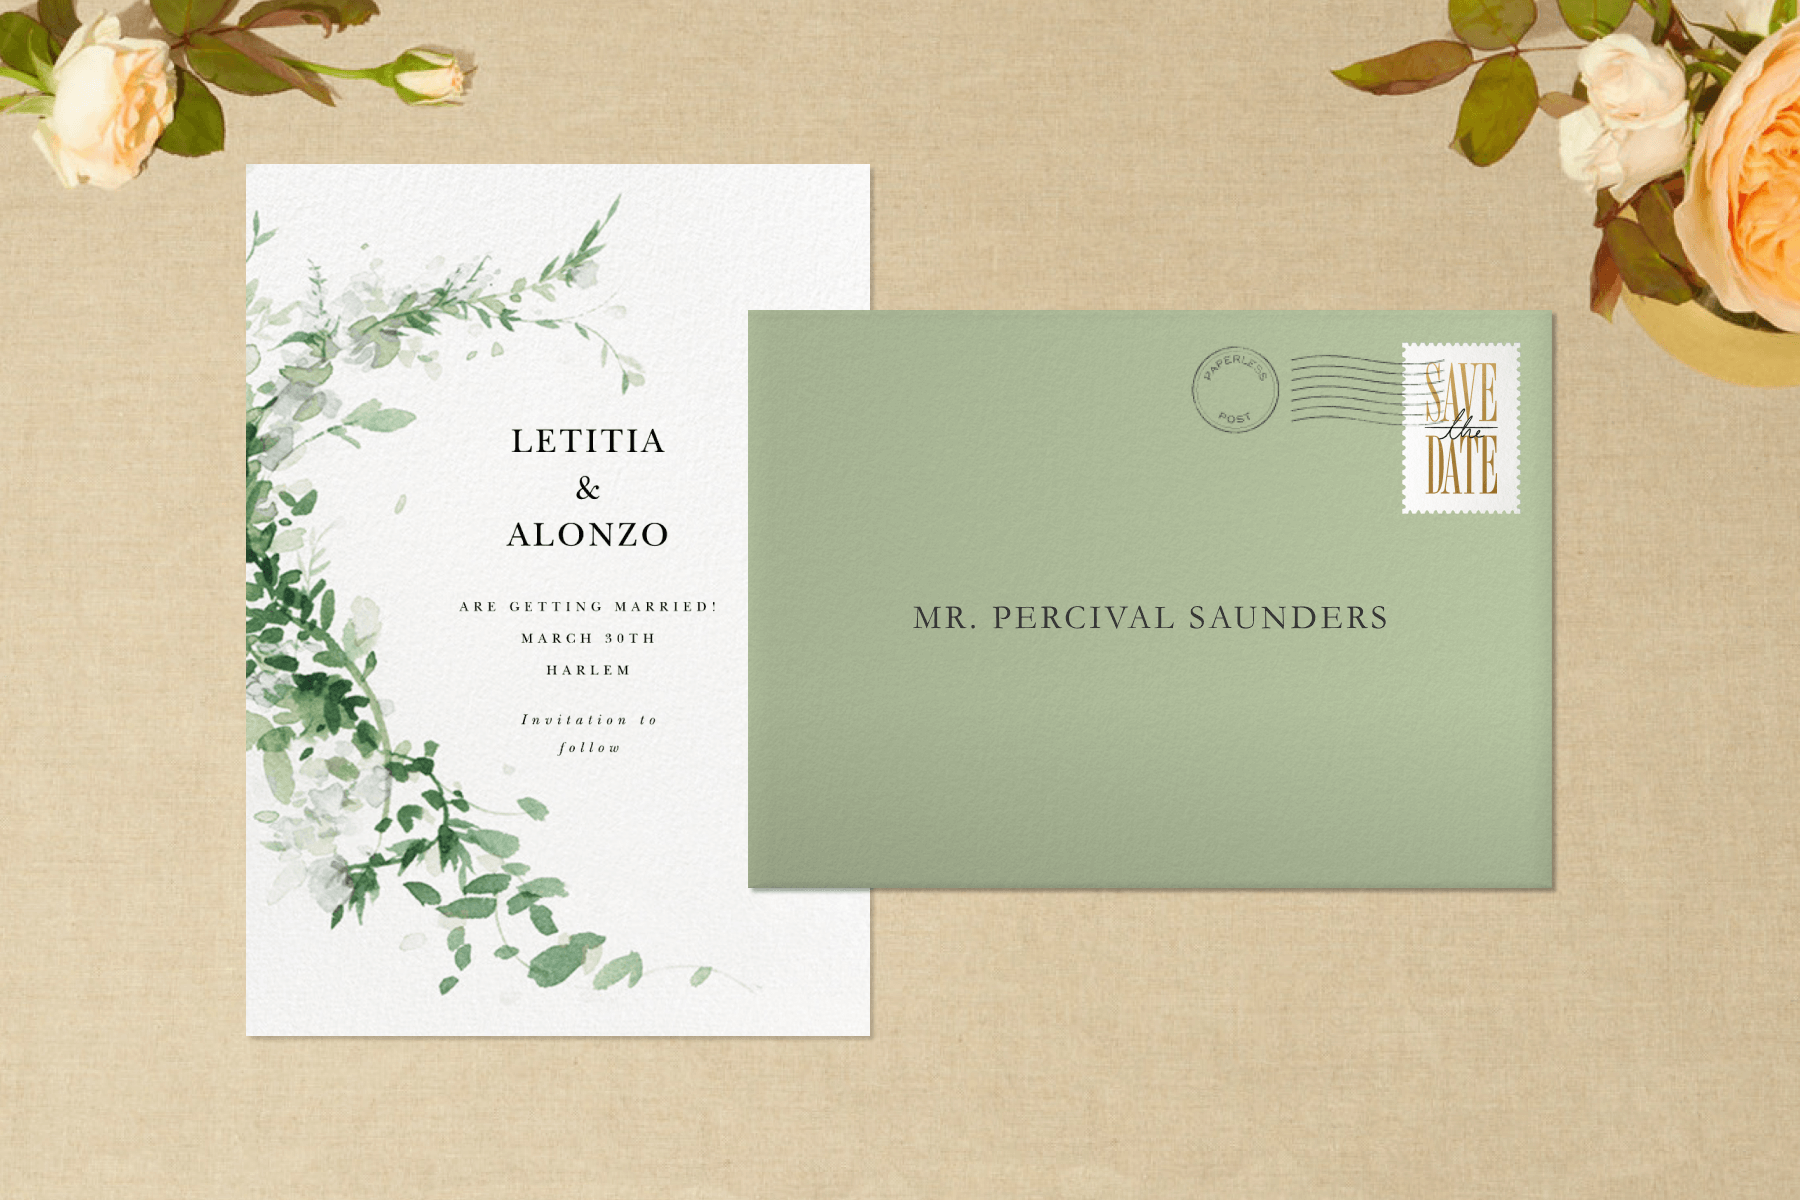 A white vertically oriented save the date card has watercolor greenery painted in a half-circle border on the left side. There is a green addressed envelope and two small rose arrangements in the upper corners of the image.